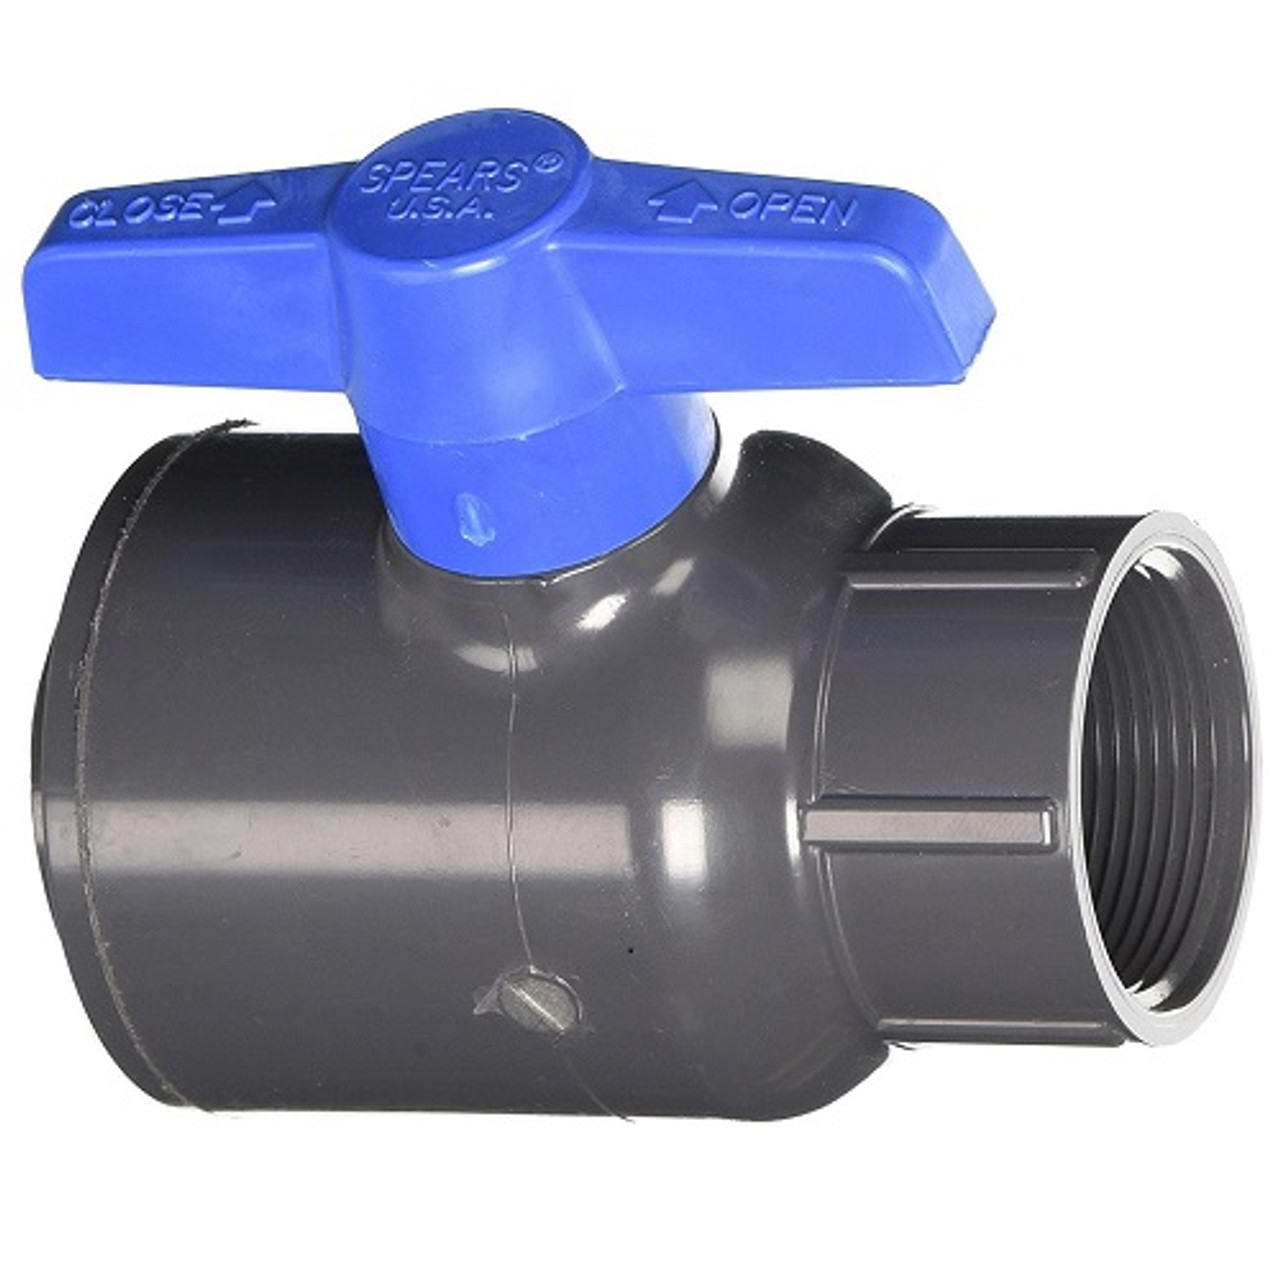 PVC 3" Gray Compact Ball Valve (Threaded) - The Drainage Products Store